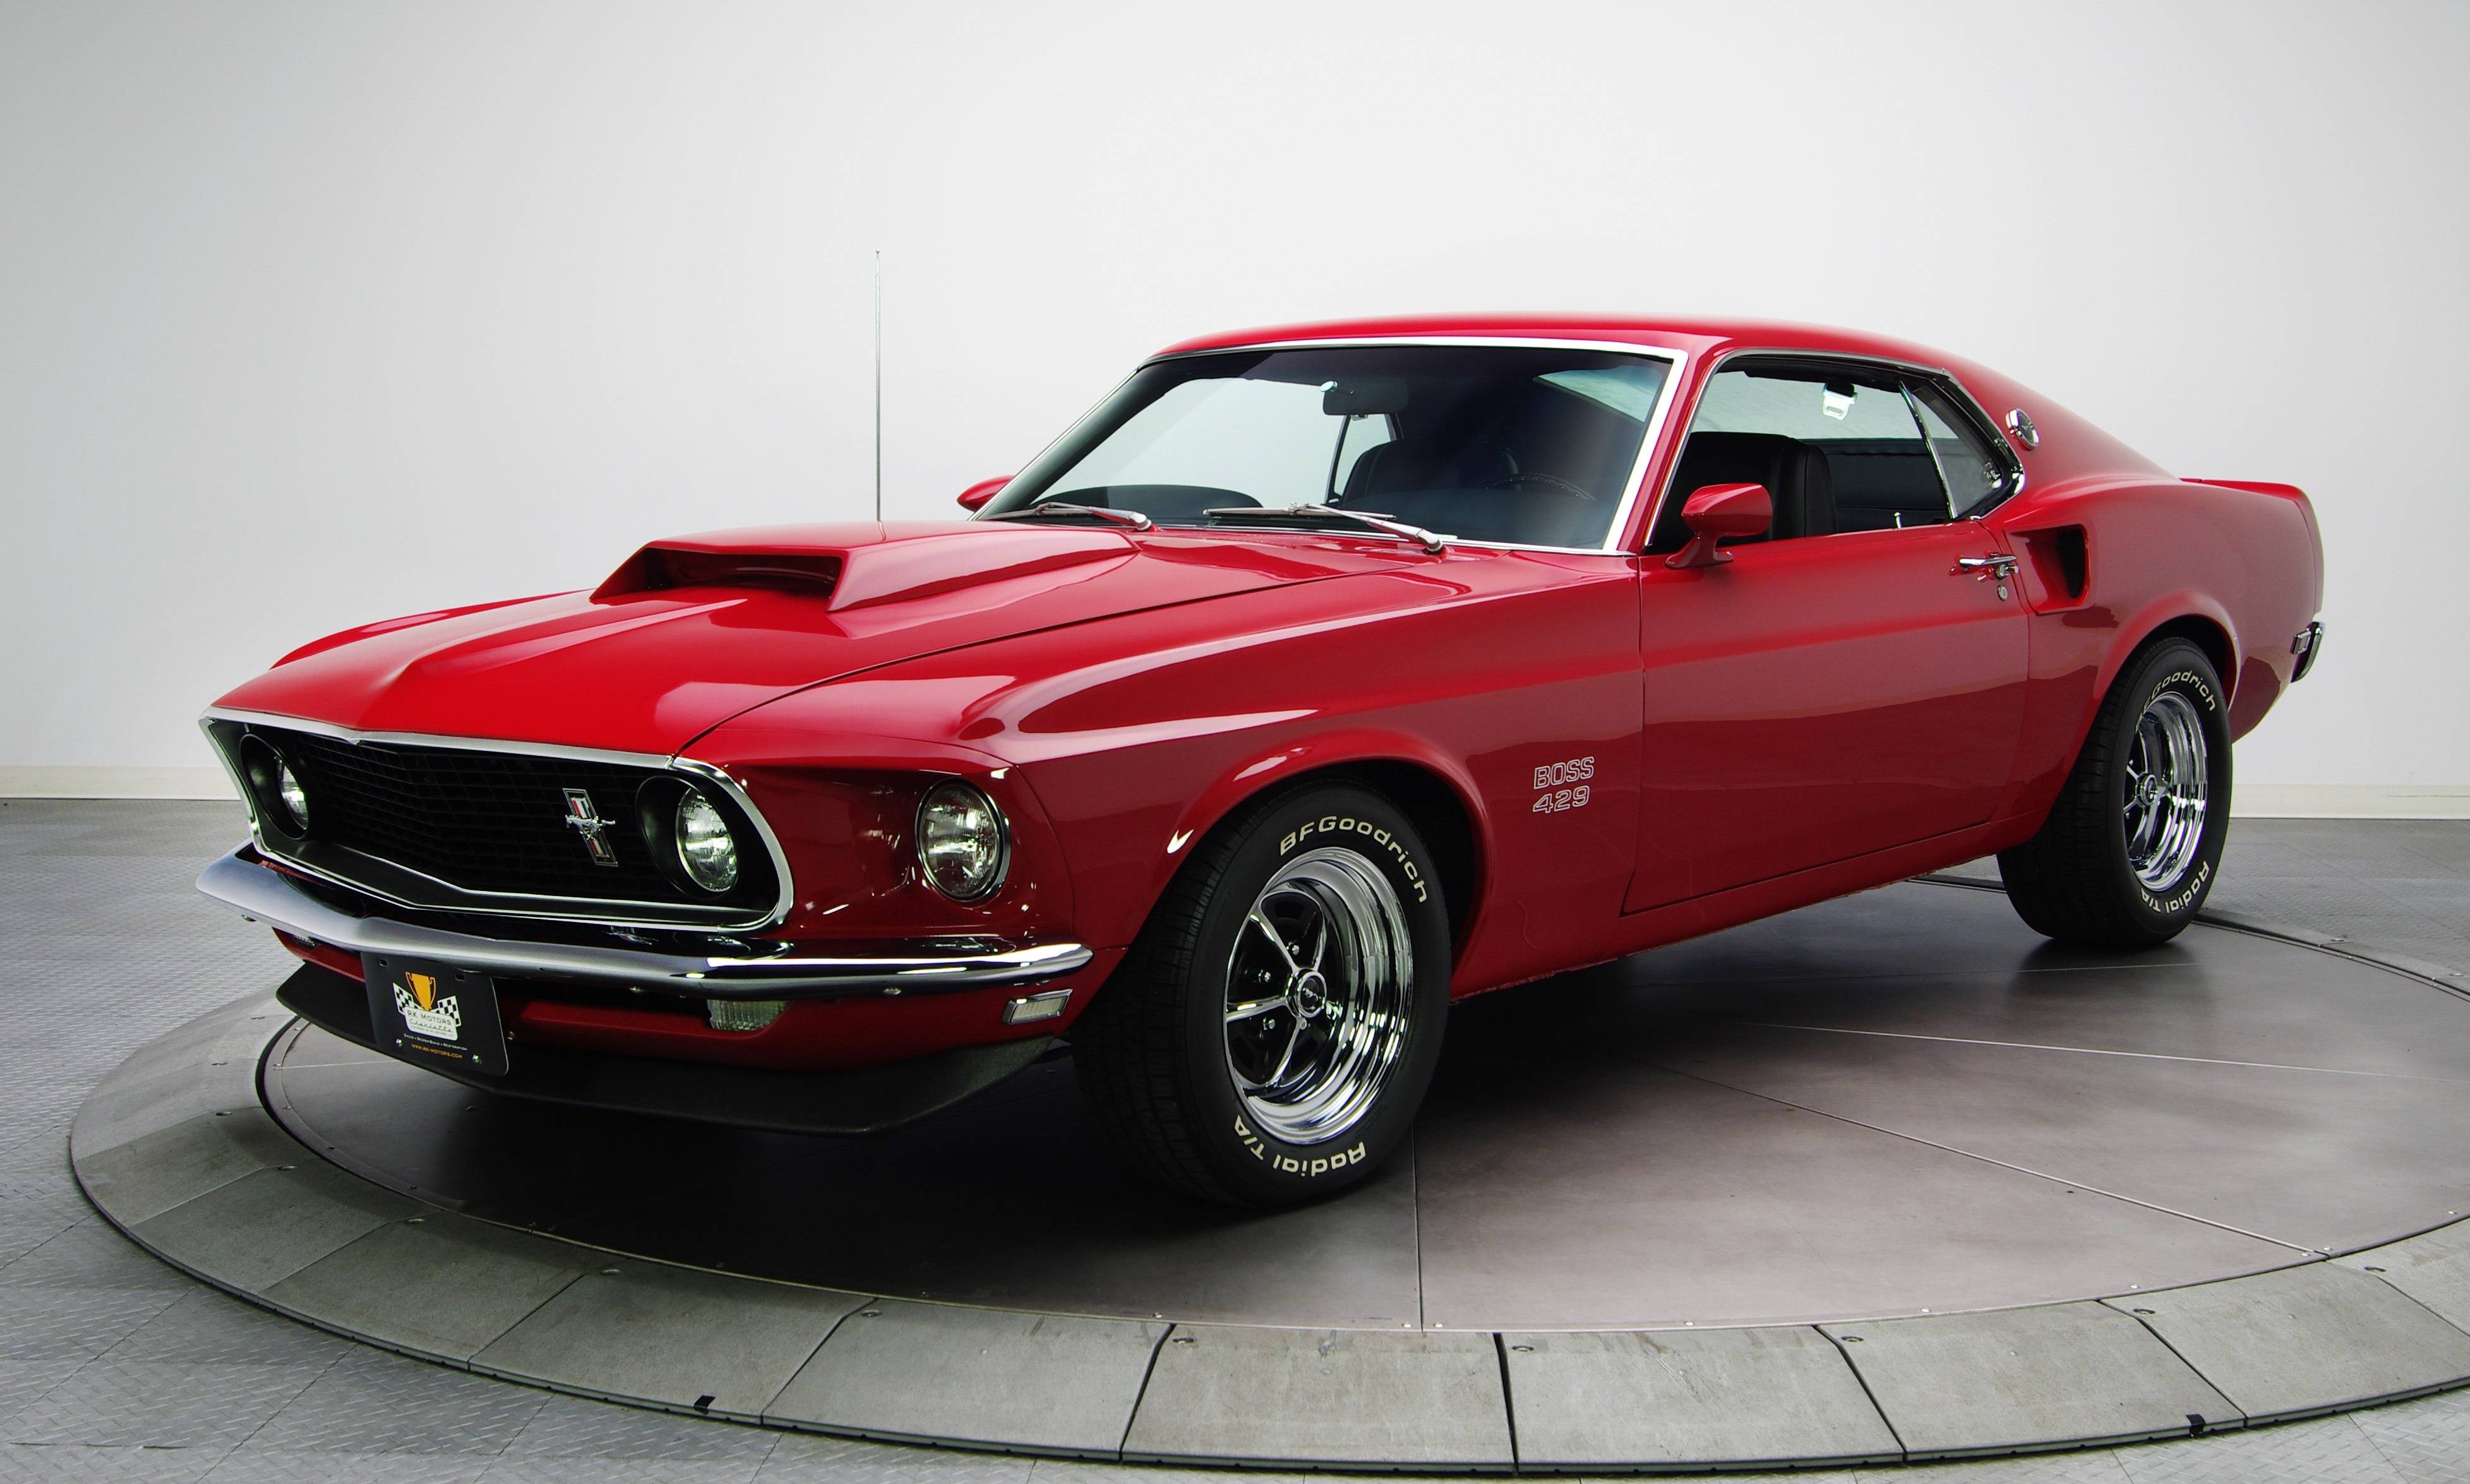 Ford Cars : Ford Mustang Red Color Hd Wallpaper Ford Mustang Wiki ...